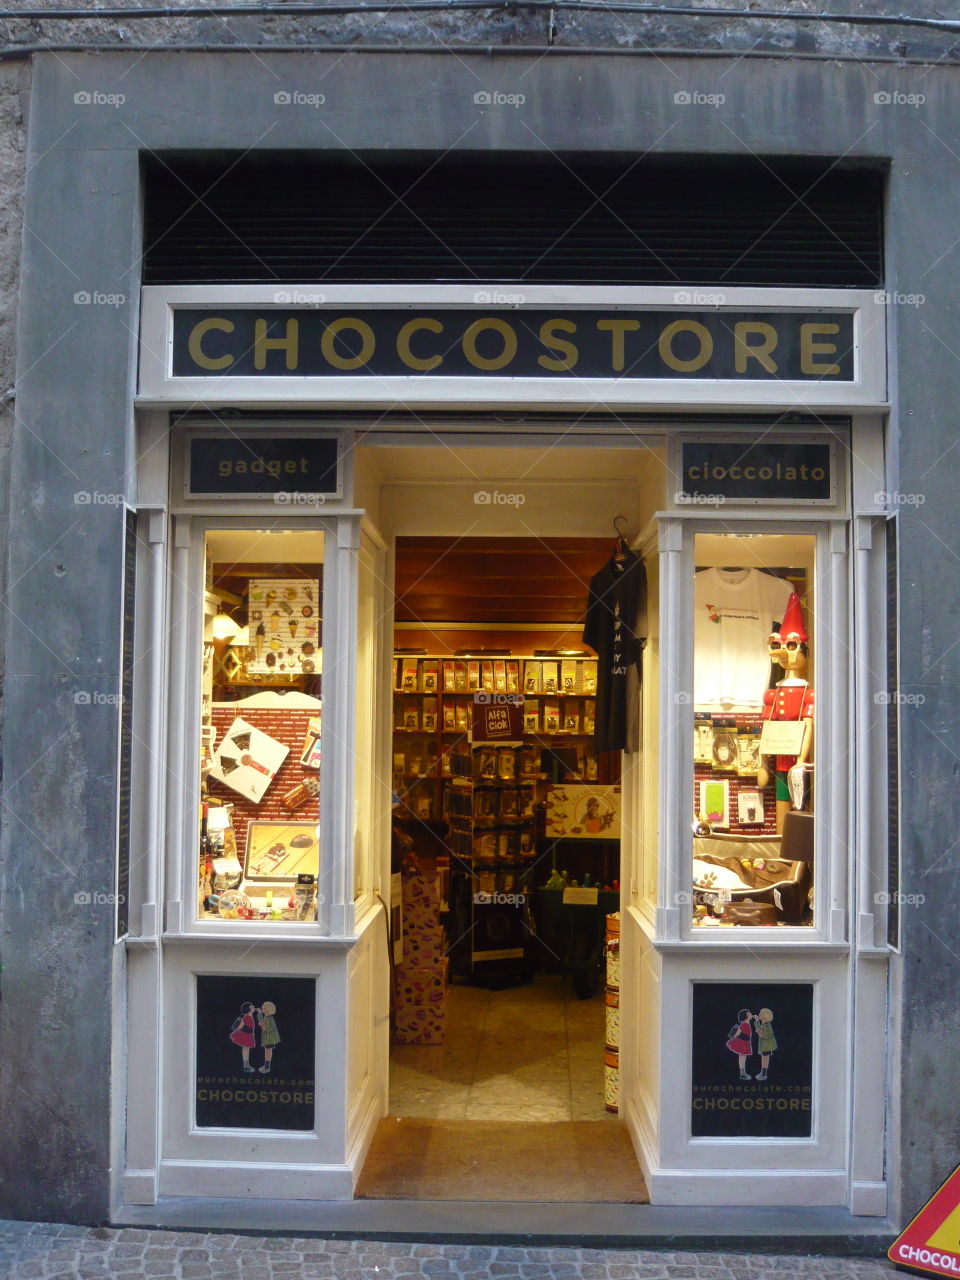 Chocolate store in Italy